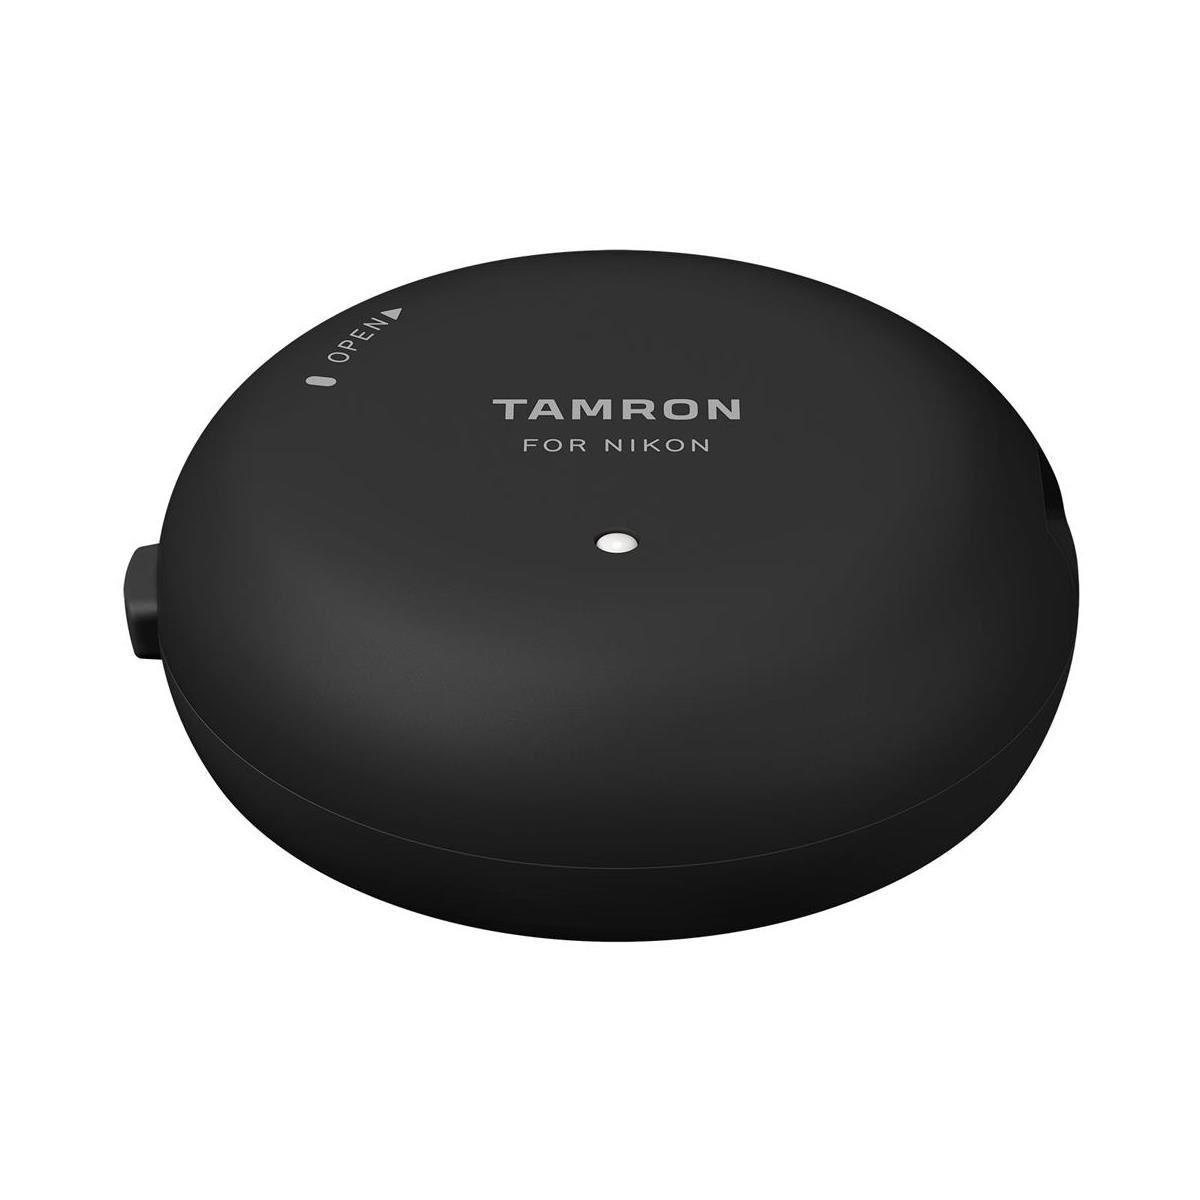 Tamron TAP-in Console for Nikon F Lens